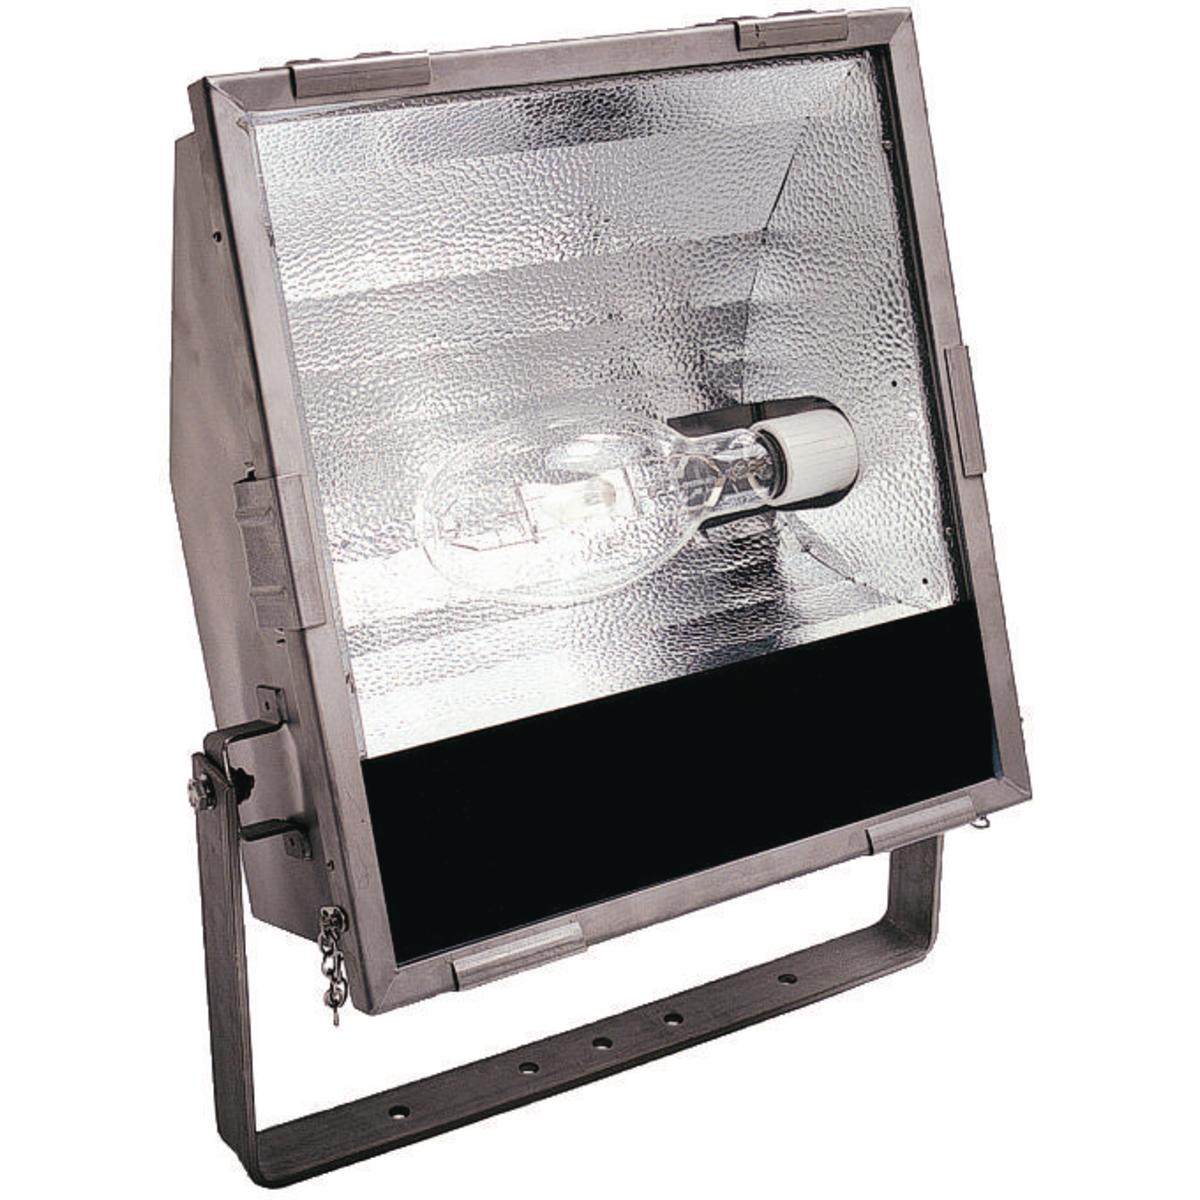 Hubbell KFS250SS-NR KFSS Series - Stainless Steel 250 Watt High Pressure Sodium Marine Ex nR Floodlight (Lamp Not Included) - Quadri-Volt (120/208/240/277V) At 60Hz  ; Type 316 Stainless Steel Housing. 16-gauge housing ensures low corrosion and long life, reducing maintenanc